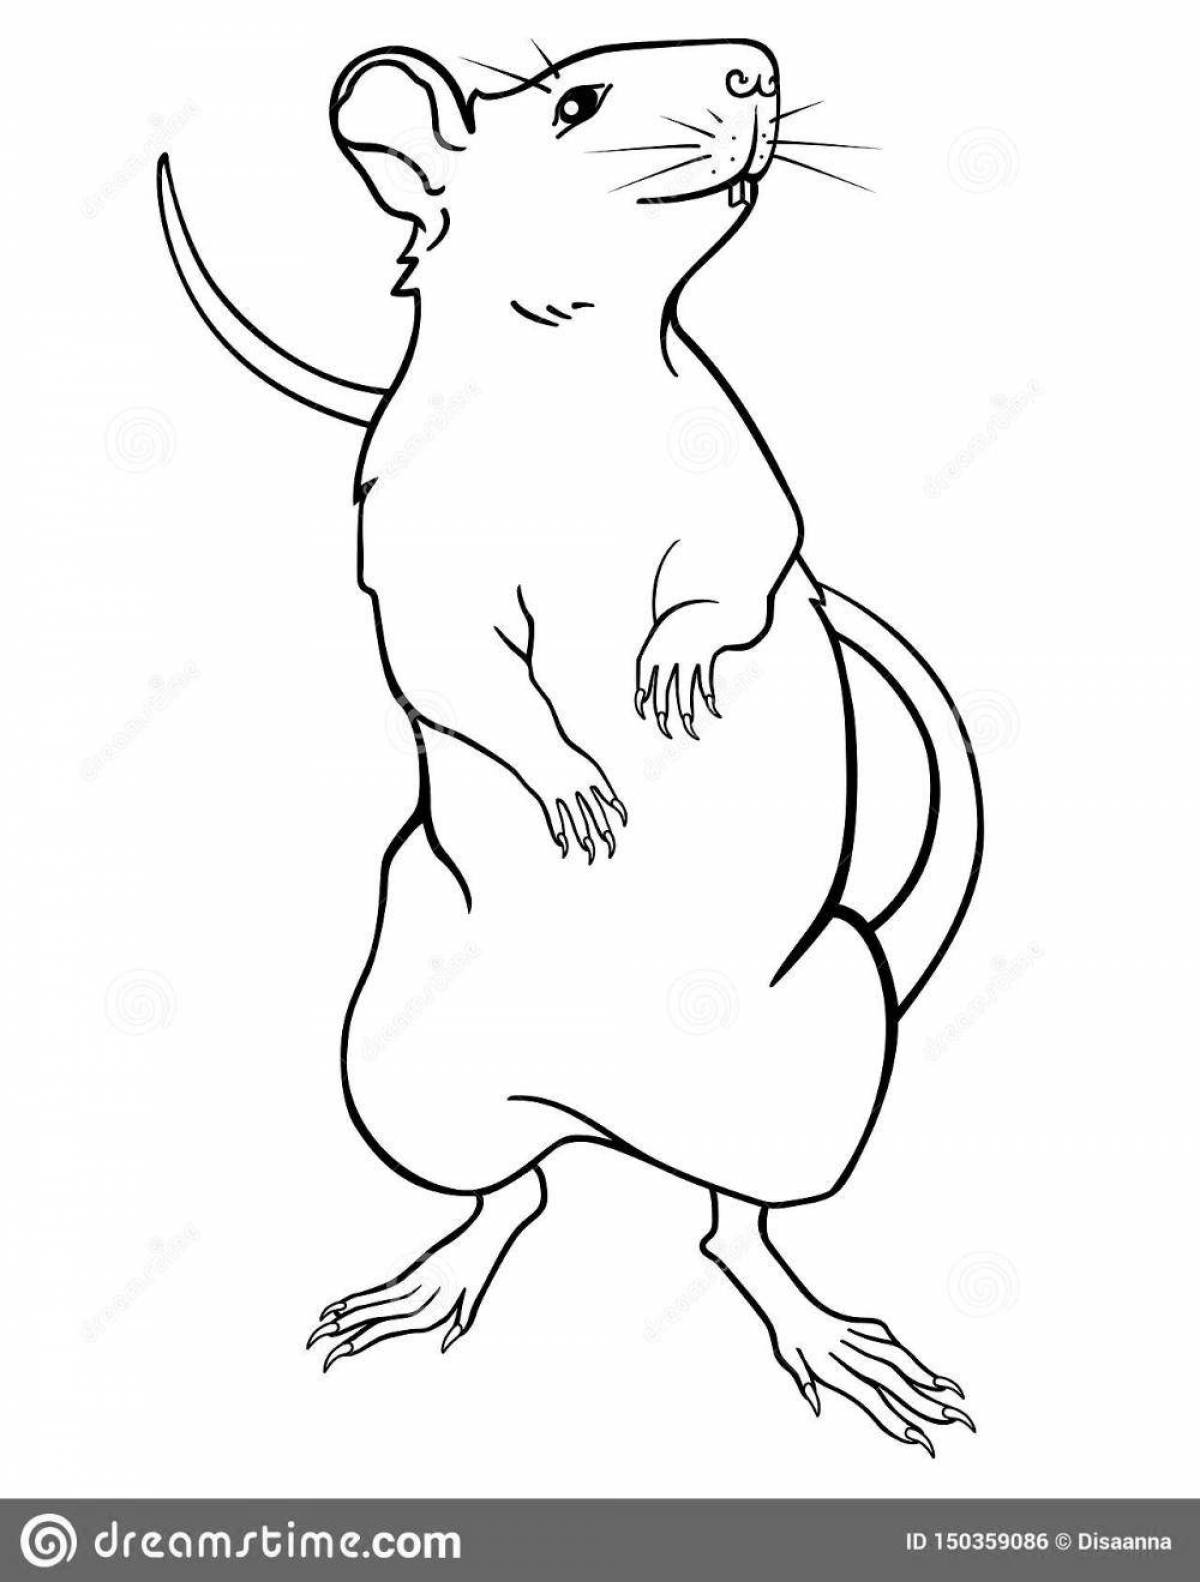 Amusing rodent coloring book